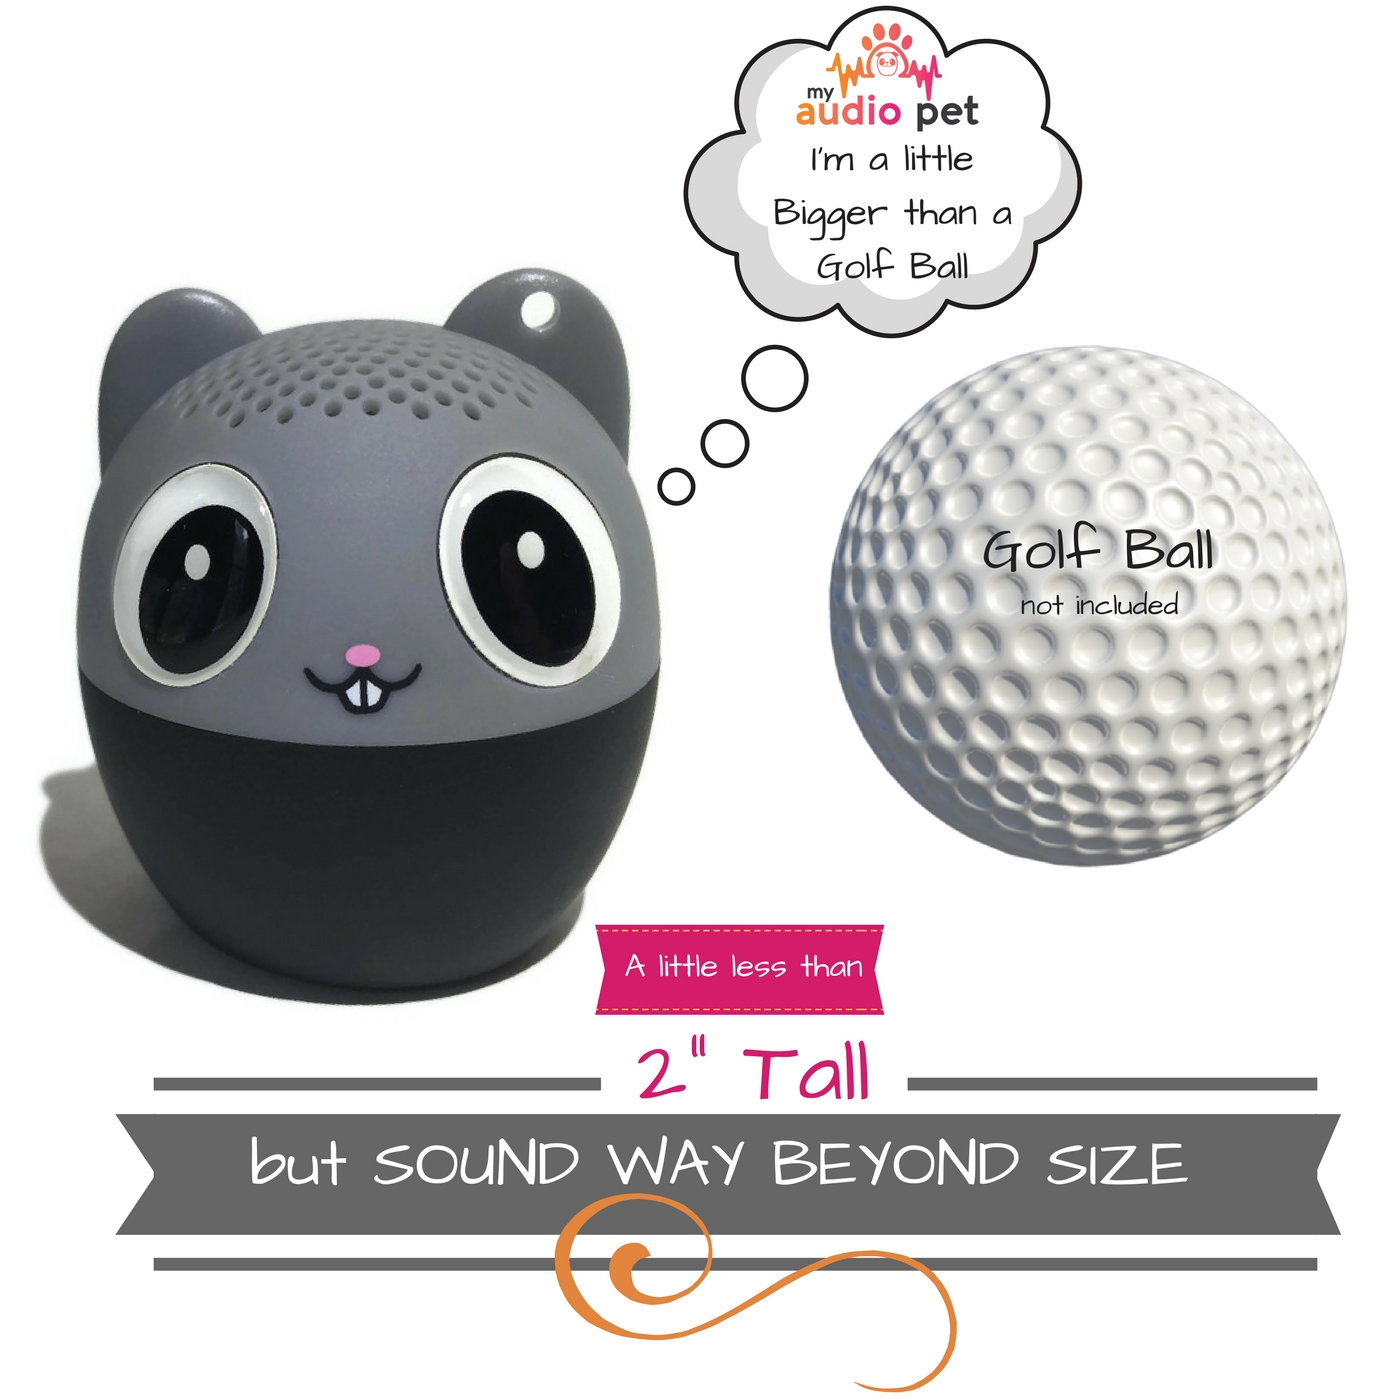 My Audio Pet (TWS) Mini Bluetooth Animal Wireless Speaker with TRUE WIRELESS STEREO TECHNOLOGY _ Pair with another TWS Pet for Powerful Rich Room-filling Sound _ (Mega Mouse) - image 3 of 6